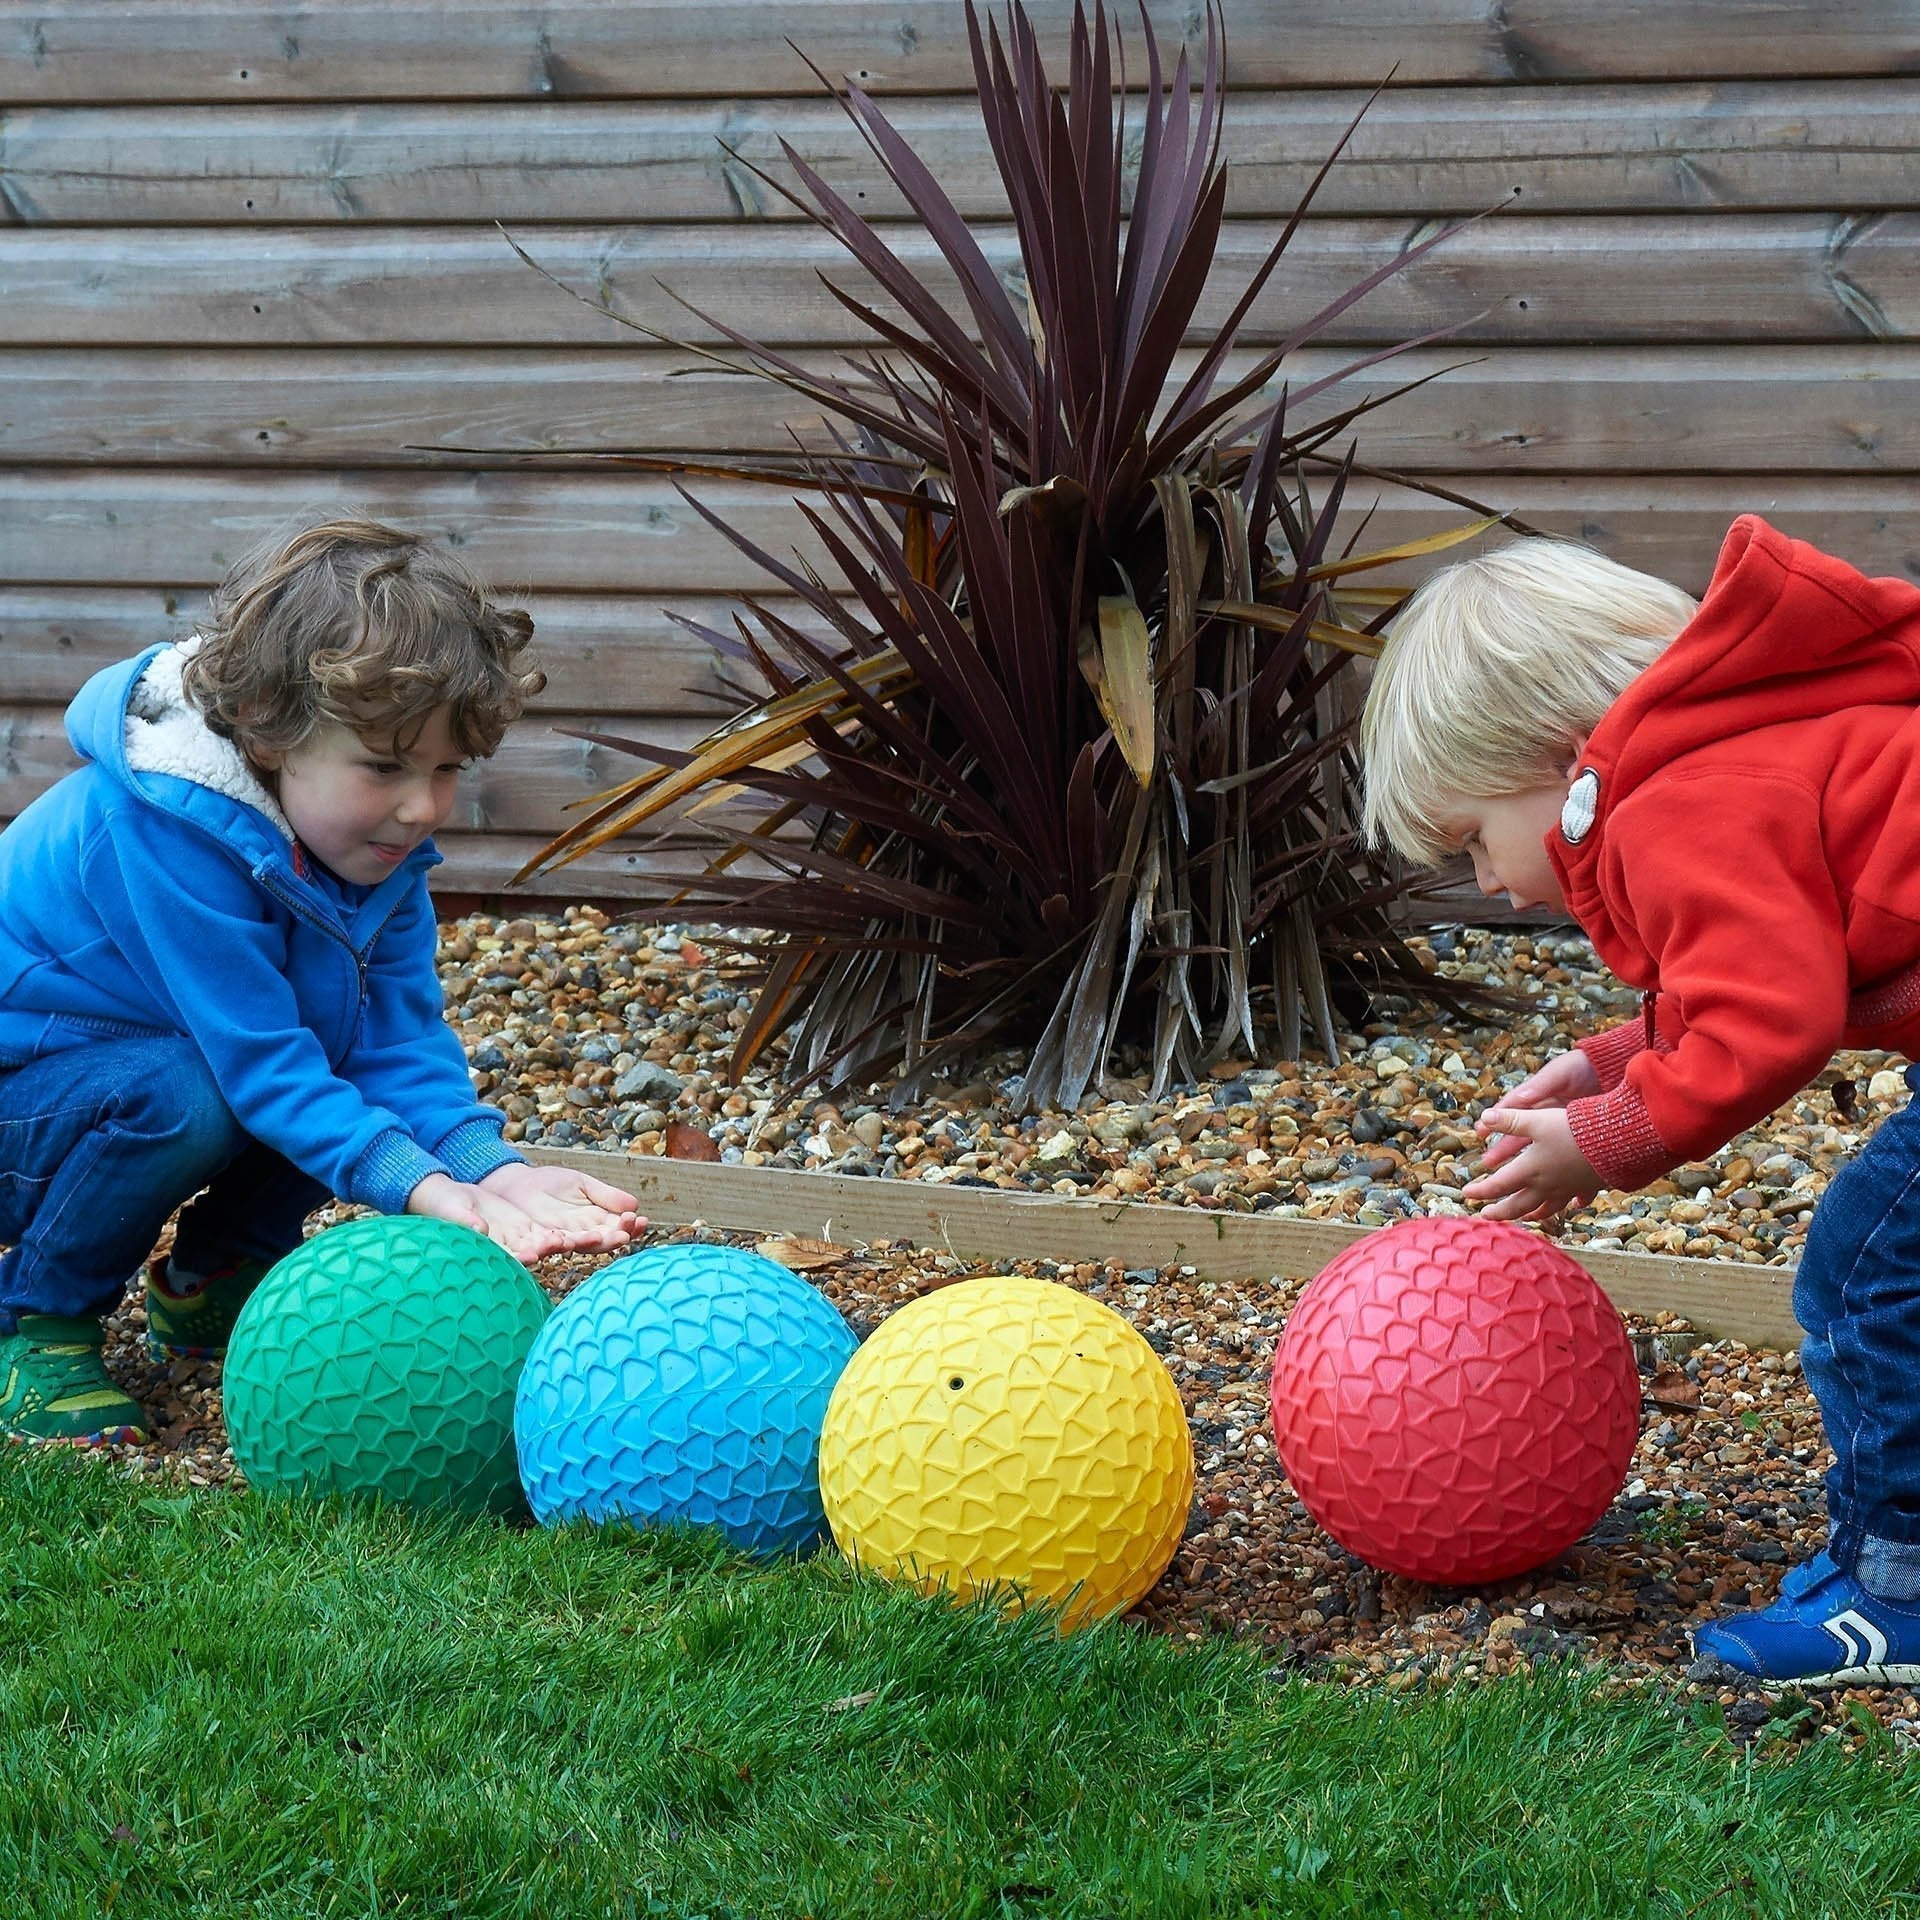 Easy Grip Balls Set - Pk4, The Easy Grip Balls Set is a delightful set of four brightly coloured inflatable Jumbo Easy Grip balls with a honeycomb effect surface which aids grip when catching and throwing. The Easy Grip Balls Set - Pk4 are lightweight but sturdy and a good size for young children to handle.Improves children’s confidence with ball skills and hand-eye coordination.The Easy Grip Balls Set - Pk4 contains ball in Red, green, blue and yellow. Supports the following areas of learning: Physical Dev